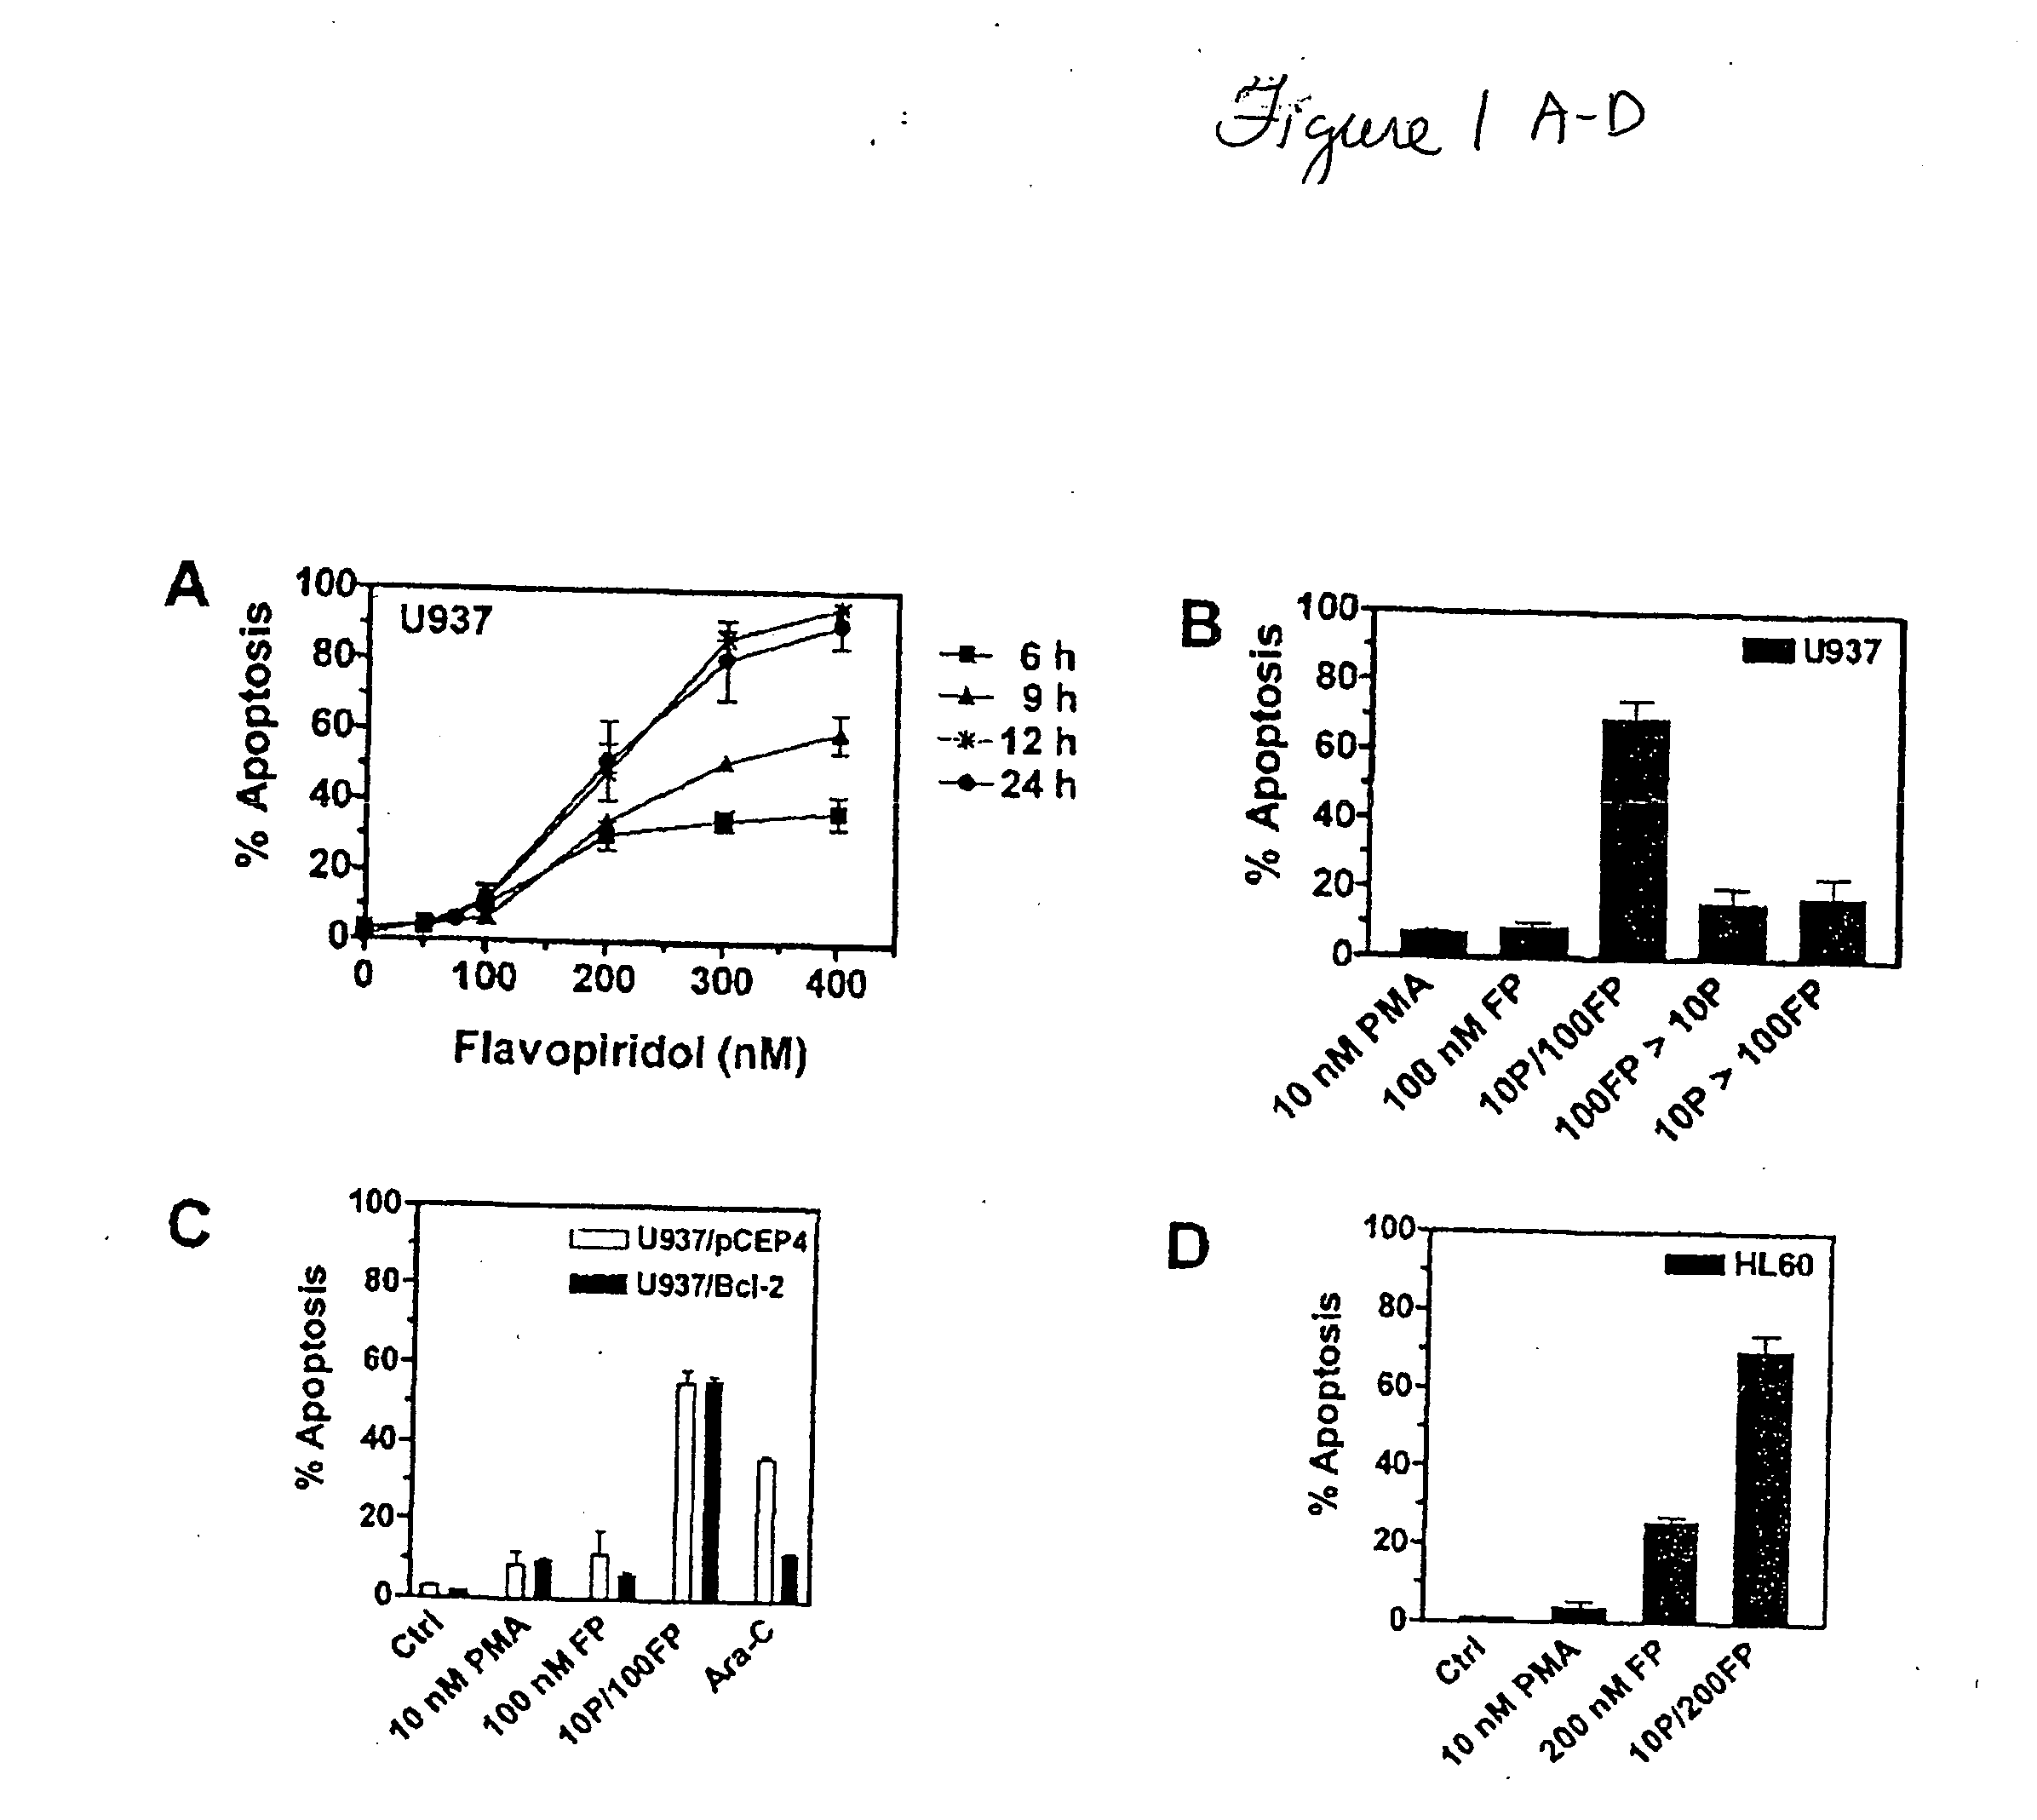 Promotion of adoptosis in cancer cells by co-administration of cyclin dependent kinase inhibitiors and cellular differentiation agents